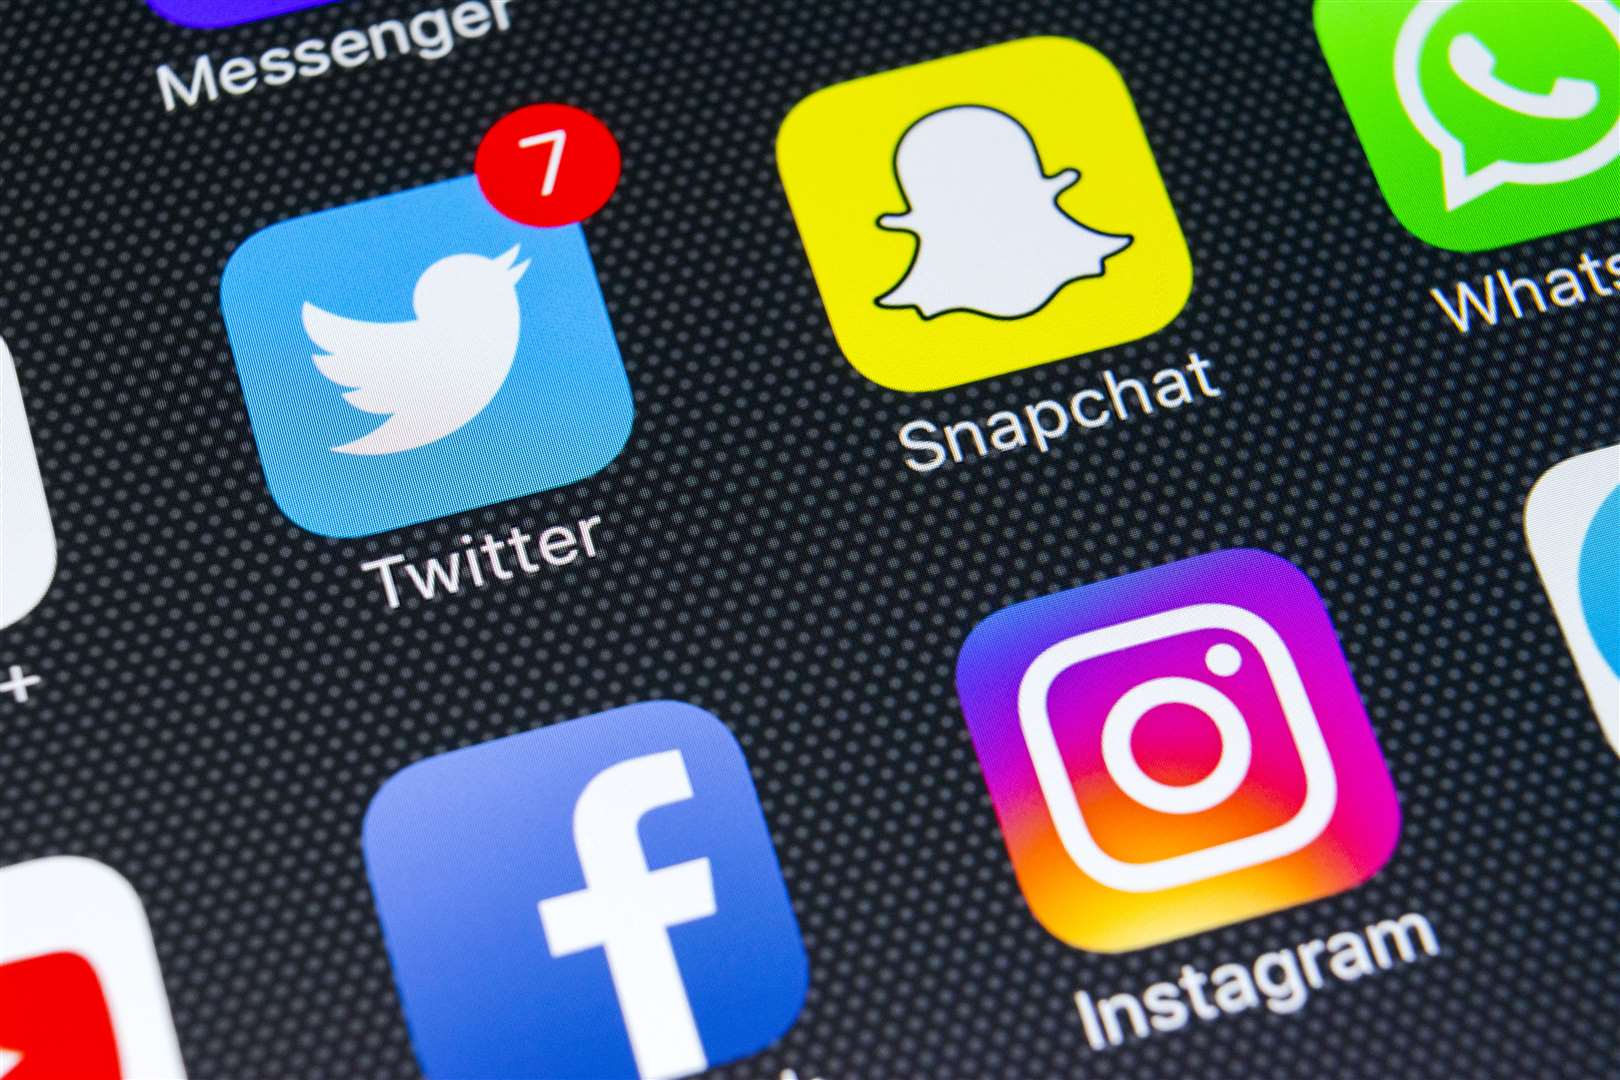 Cedar Children's Academy said they were "absolutely appalled" by reports pupils were being groomed online via Snapchat.